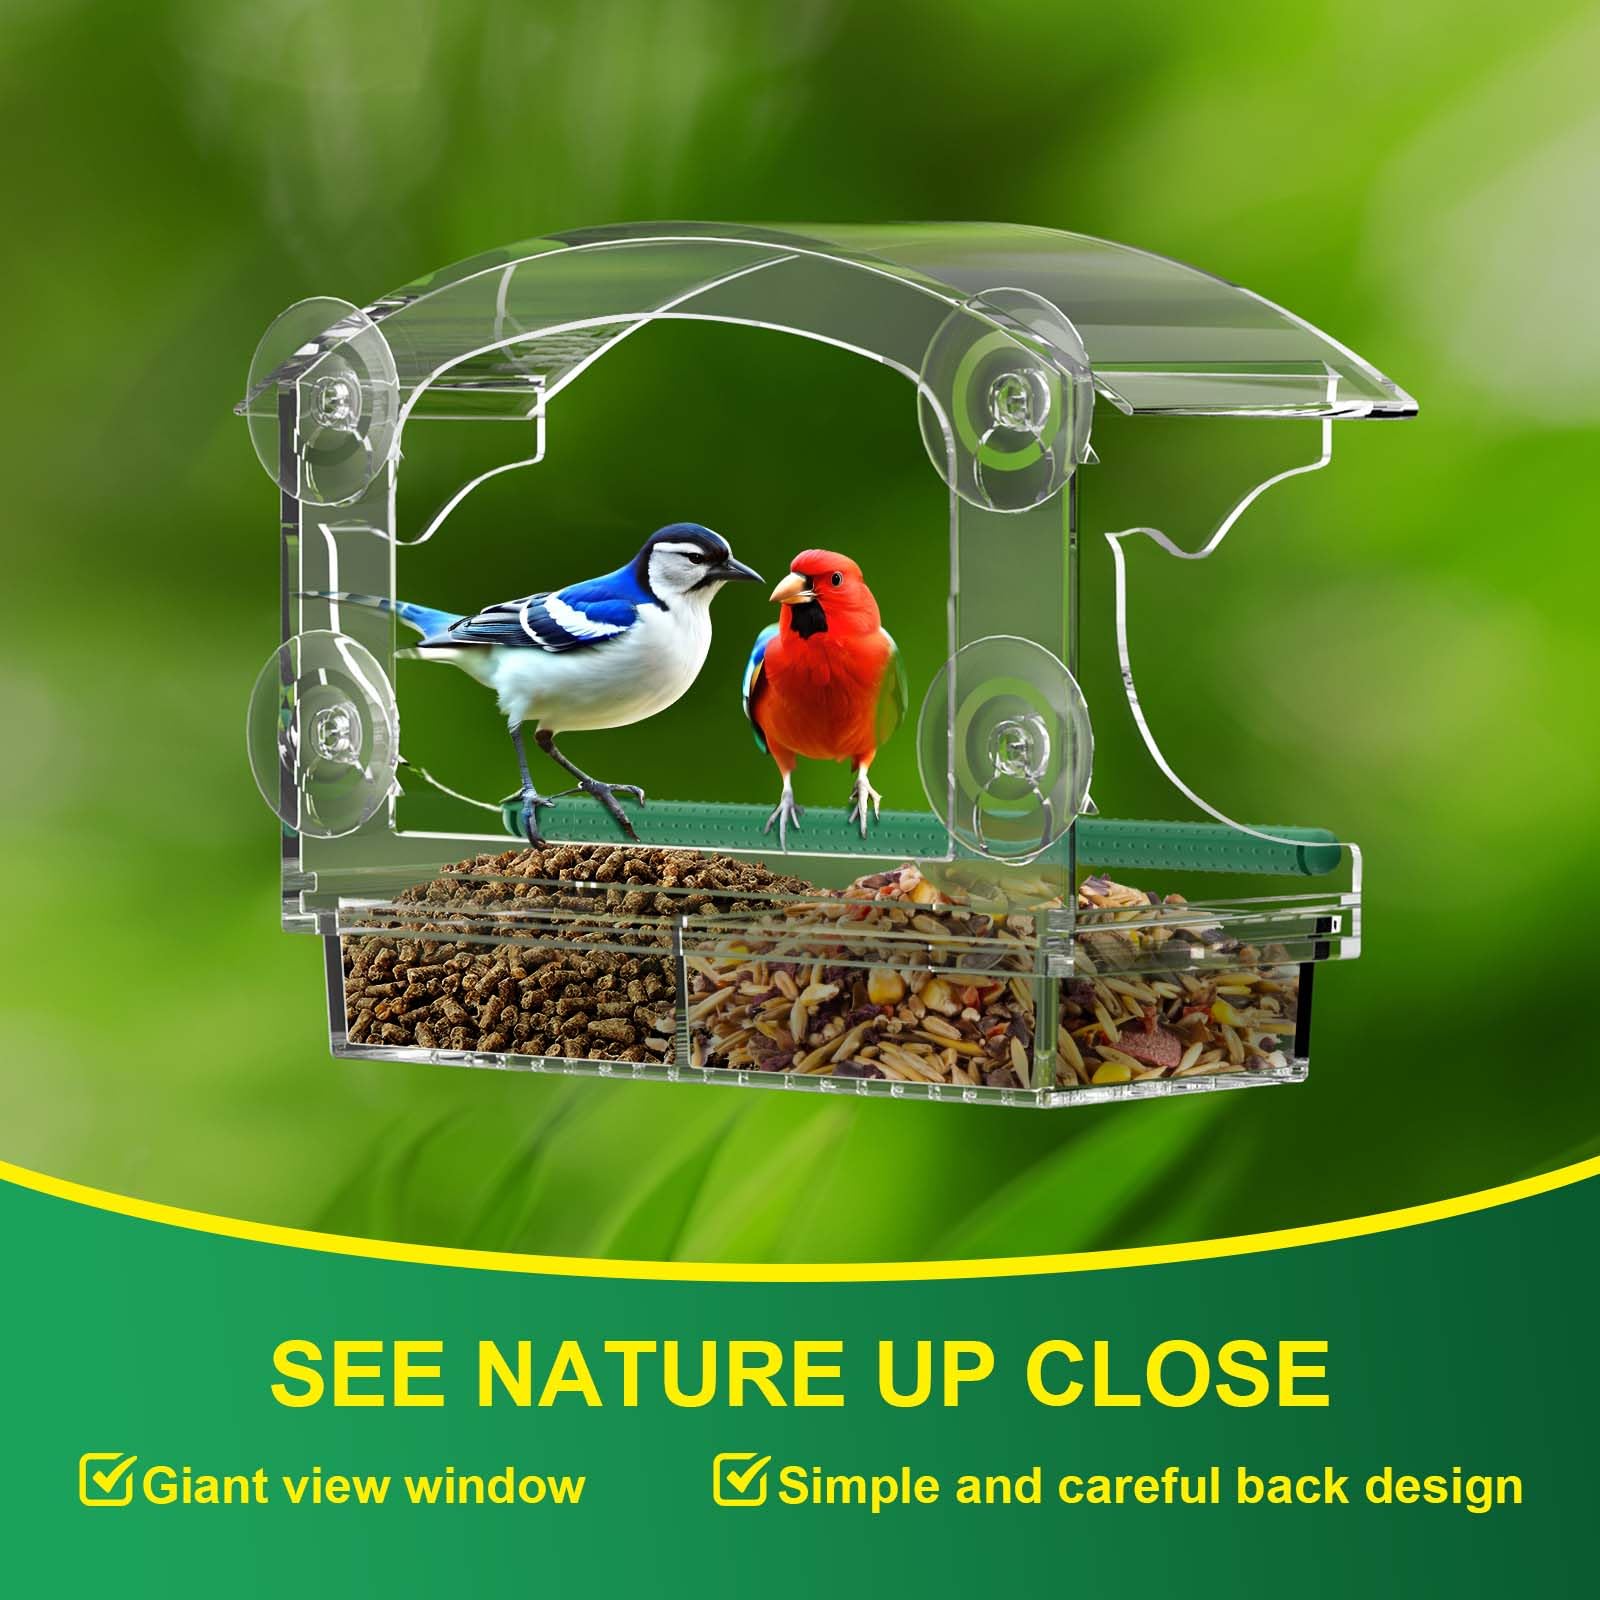 Window Bird Feeders with 4 Strong Suction Cups and Detachable Seed Tray for Small Birds only, BPYOT Acrylic Clear Bird Feeders are Unique Gardening Gifts for Elderly Grandpa/Grandma/Grandparents